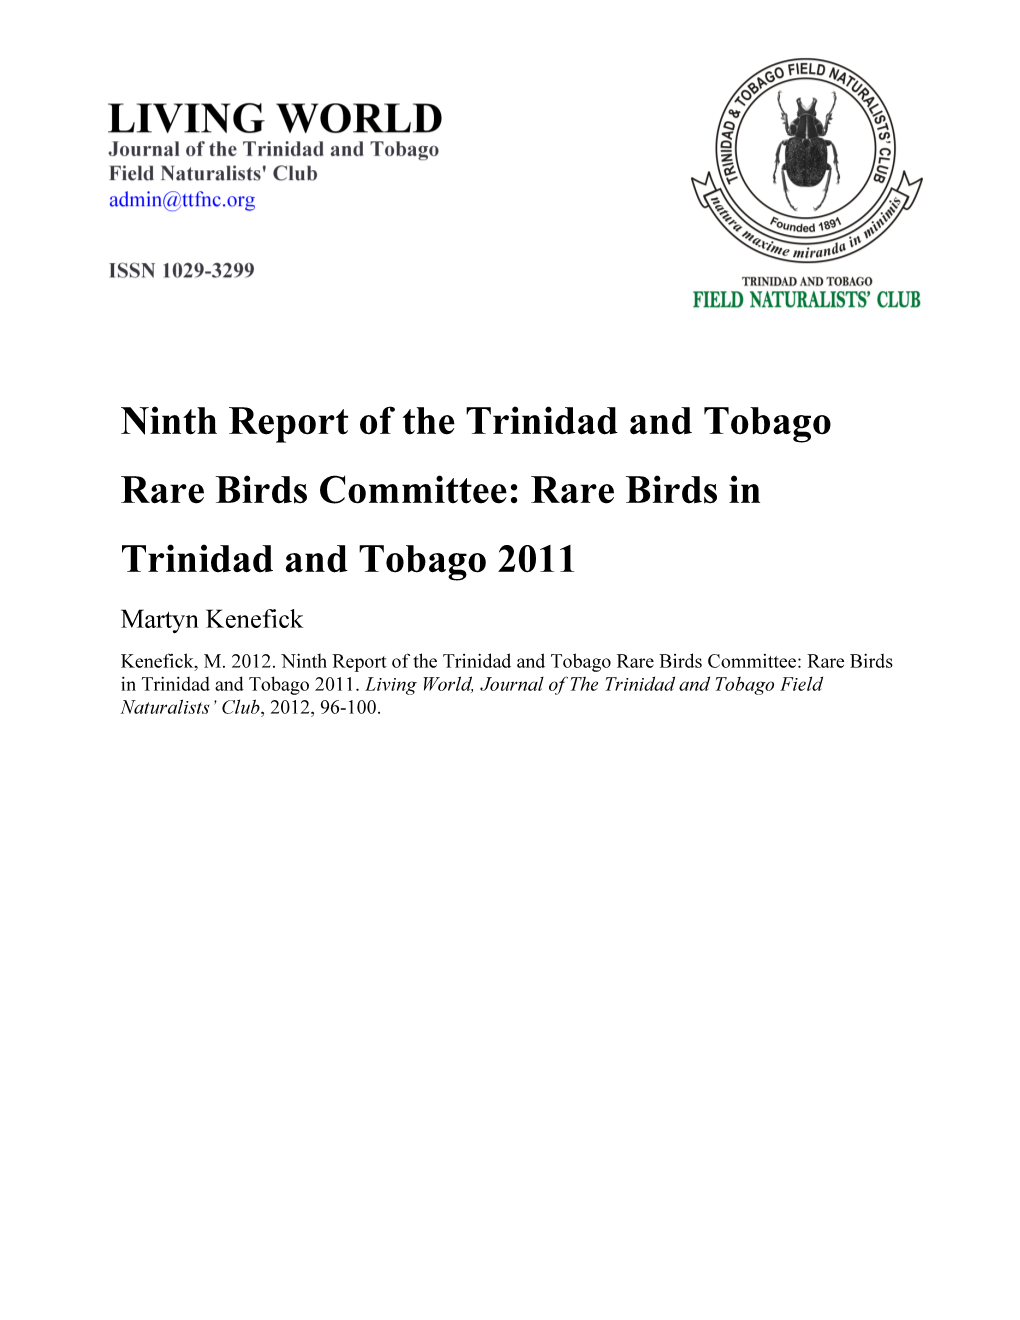 Ninth Report of the Trinidad and Tobago Rare Birds Committee: Rare Birds in Trinidad and Tobago 2011 Martyn Kenefick Kenefick, M